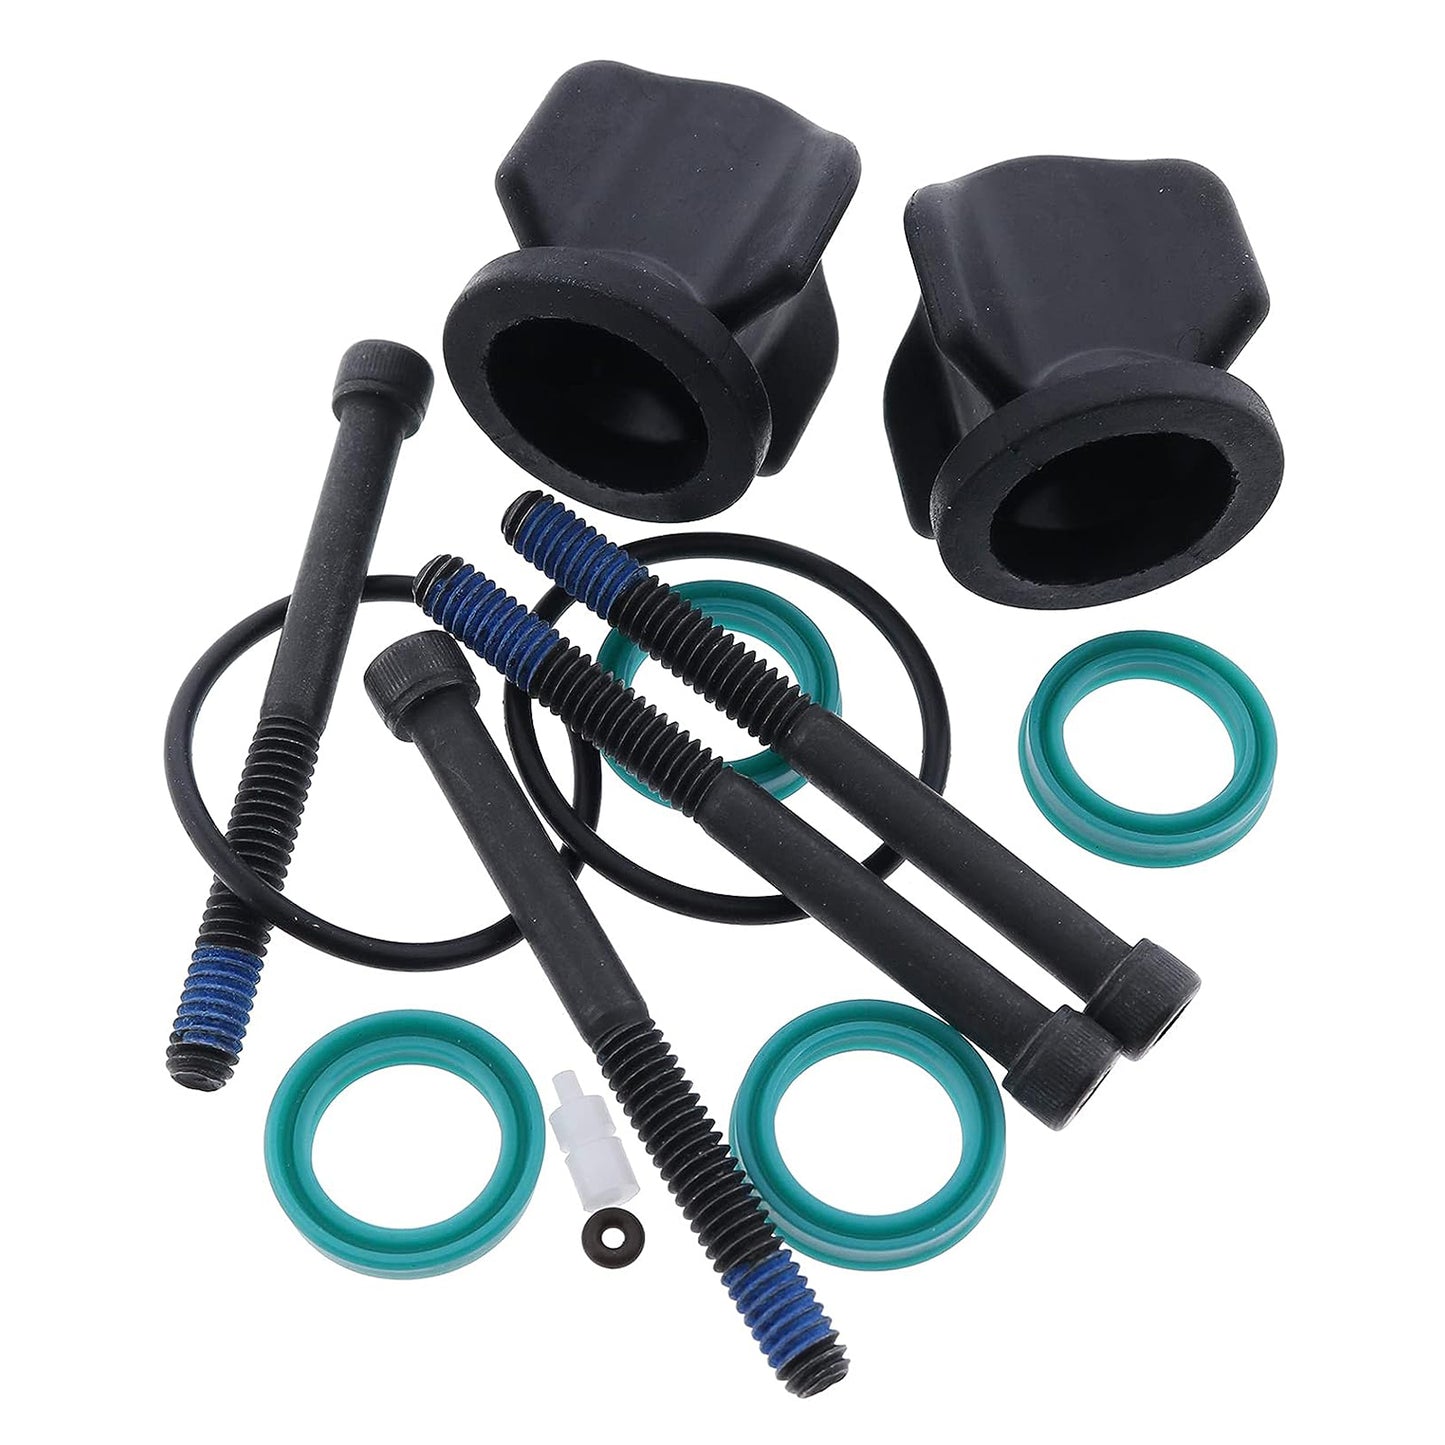 6816252 Spool Seal Kit Compatible With Bobcat 463 751 753 763 773 863 864 873 883 963